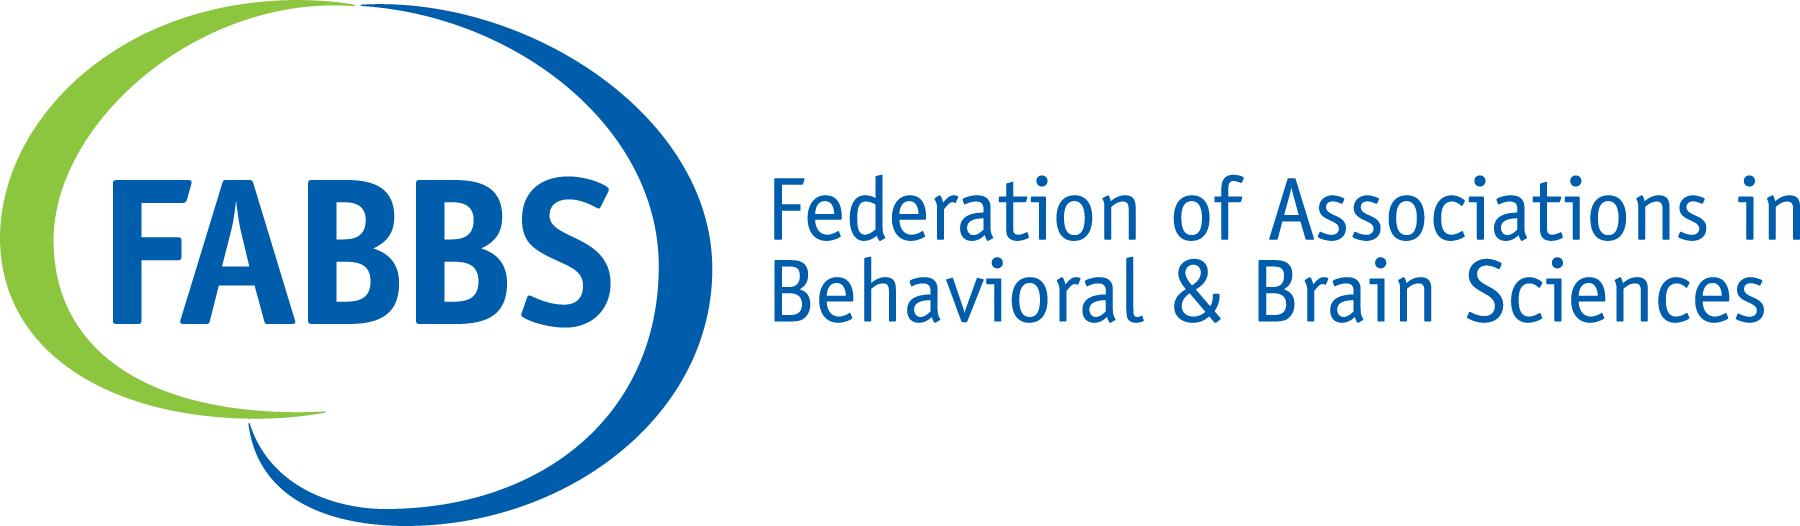 Federation of Associations in Behavioral & Brain Science 